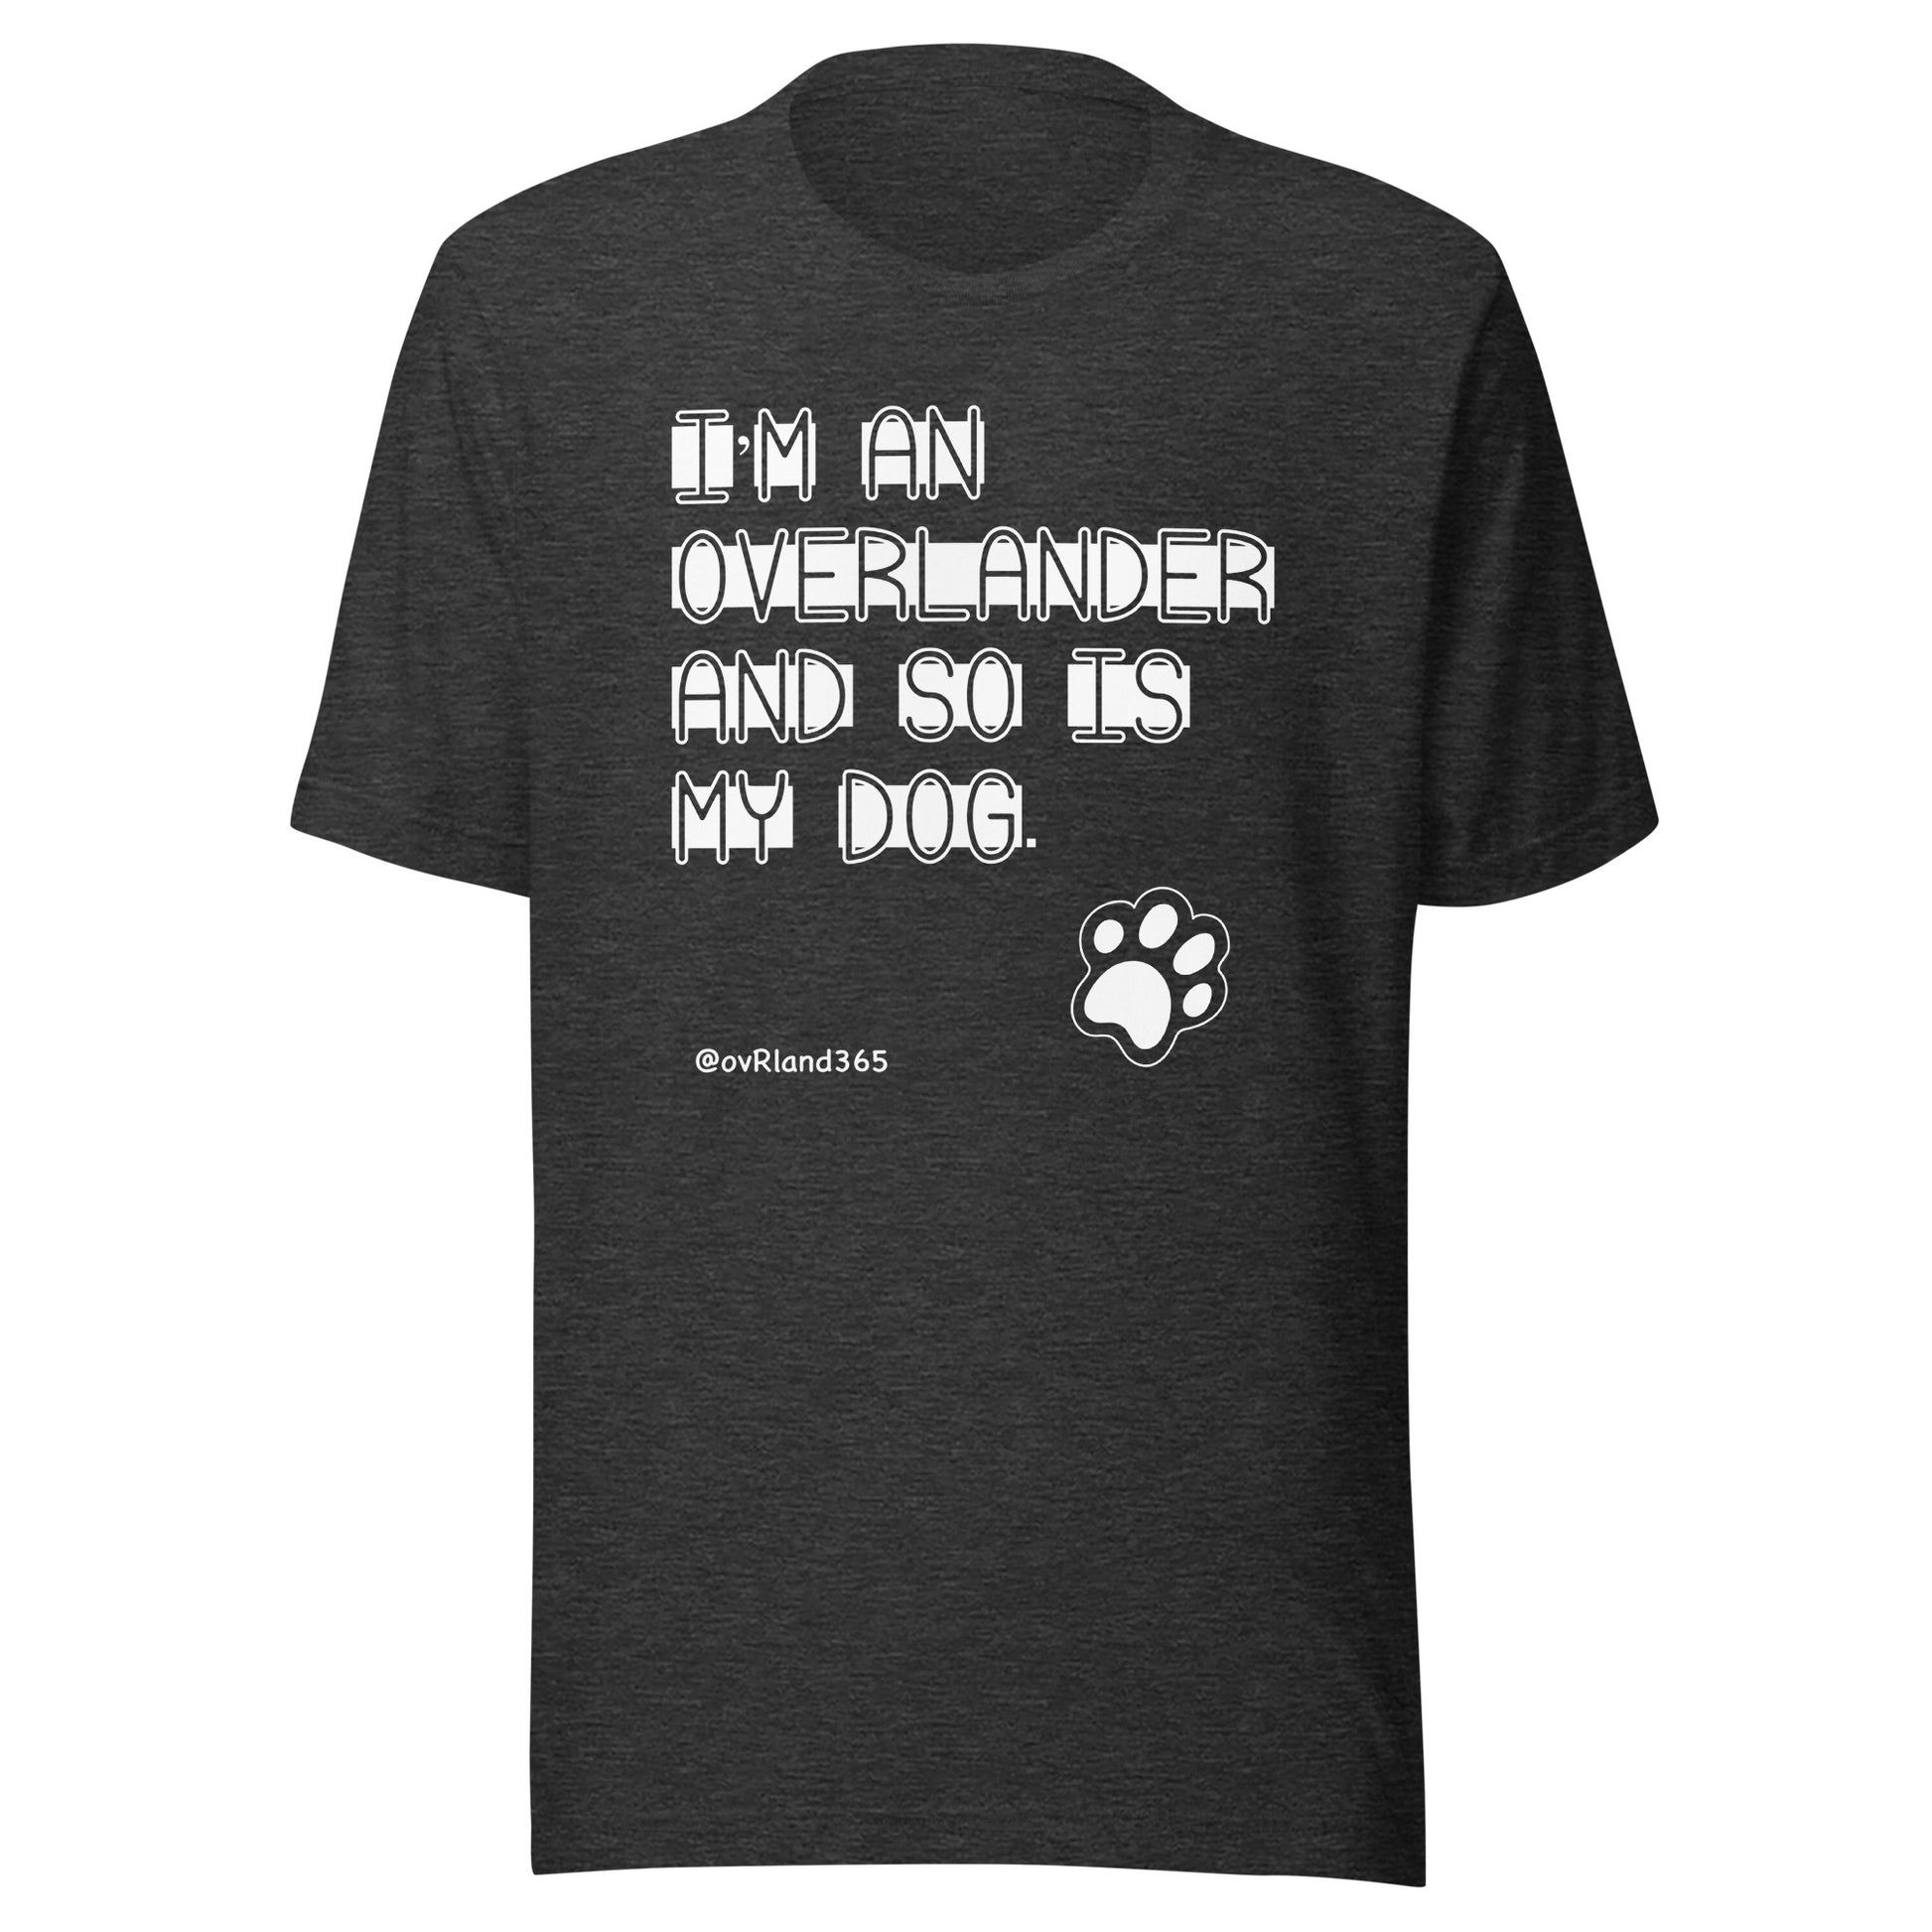 I'm an overlander and so is my dog. Dark Grey t-shirt with a paw print. overland365.com